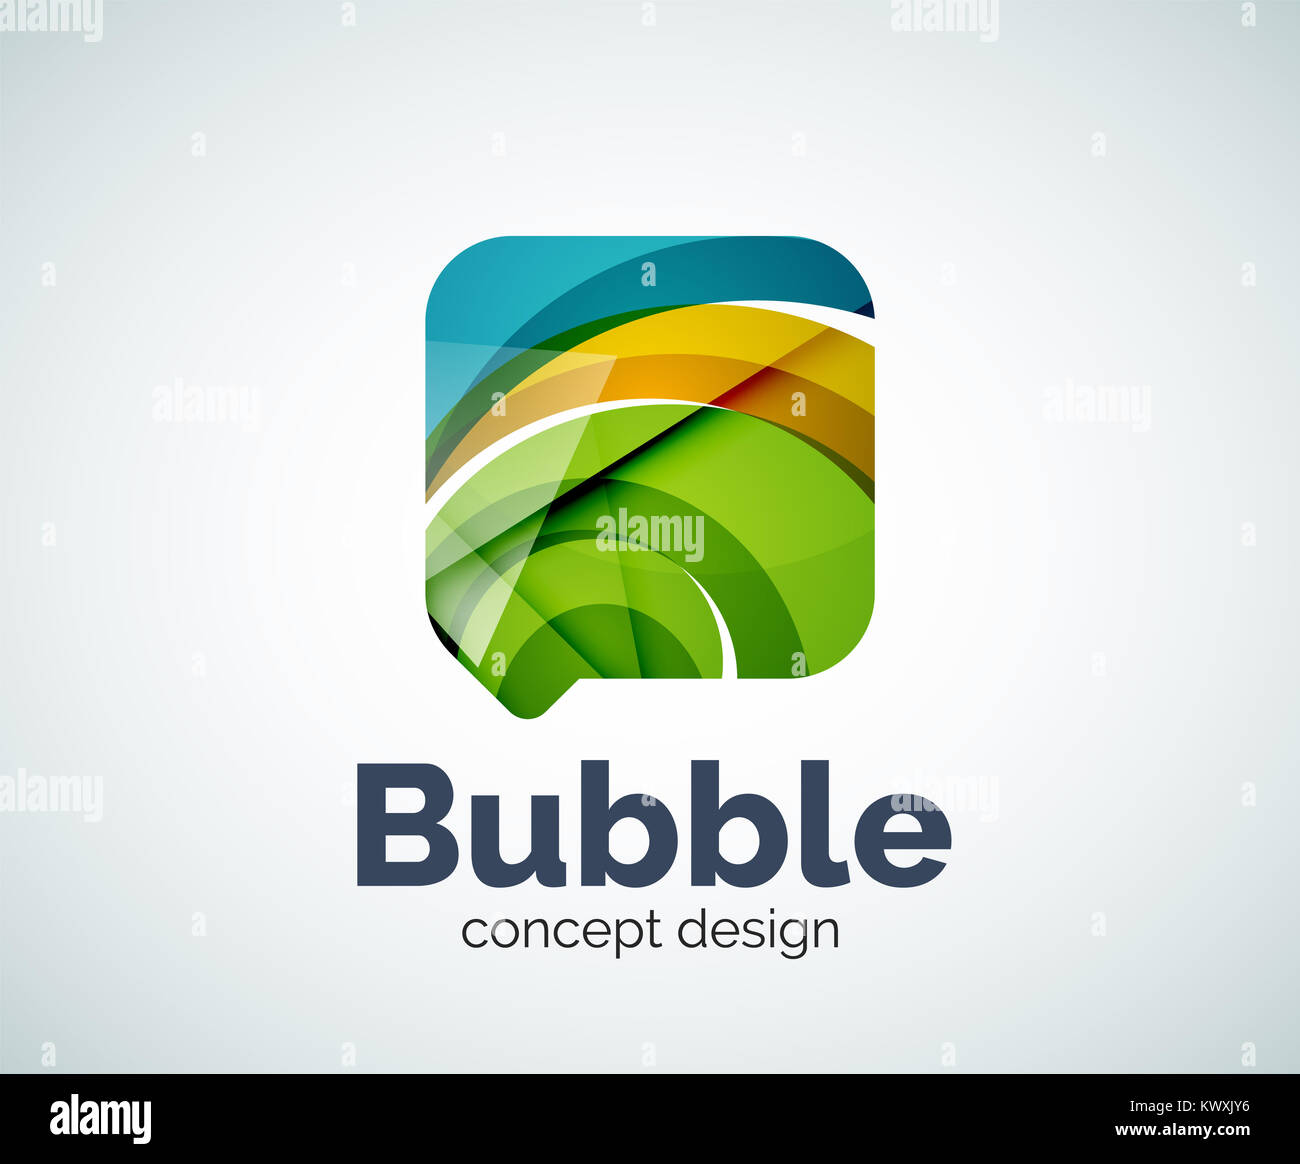 Bubble logo template created with abstract geometric overlapping elements Stock Photo